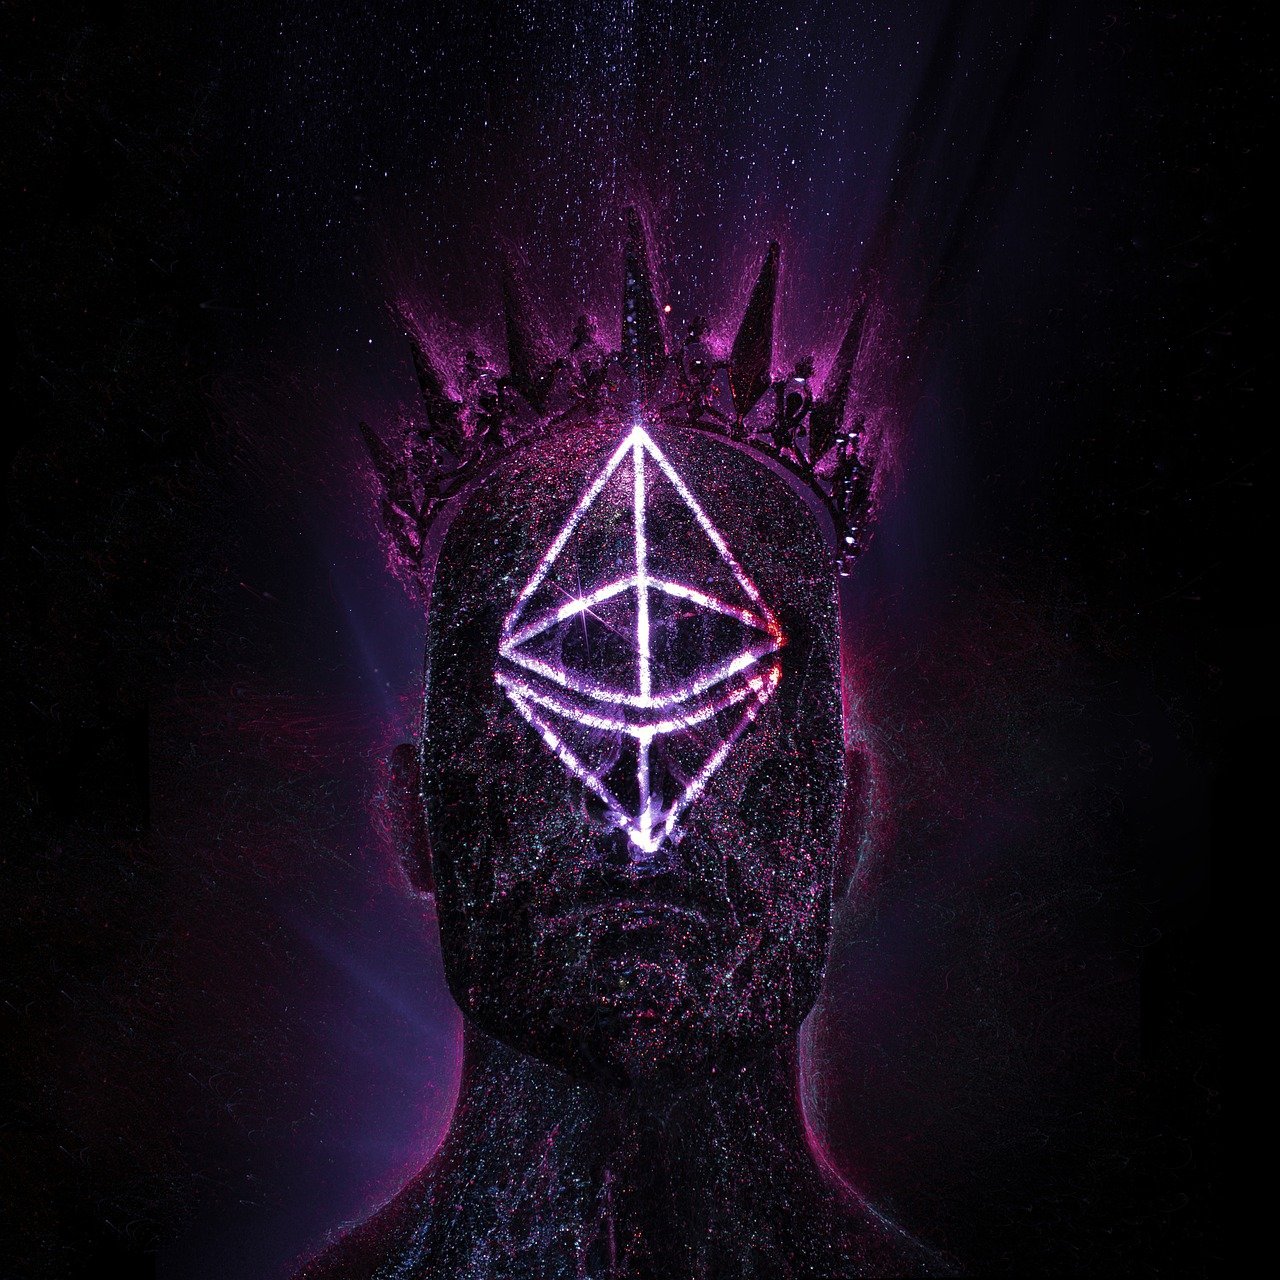 a man with a crown on his head, cyberpunk art, digital art, 3 d of the ethereum symbol, dark age is coming, epic illumination, made of crystalized synapse